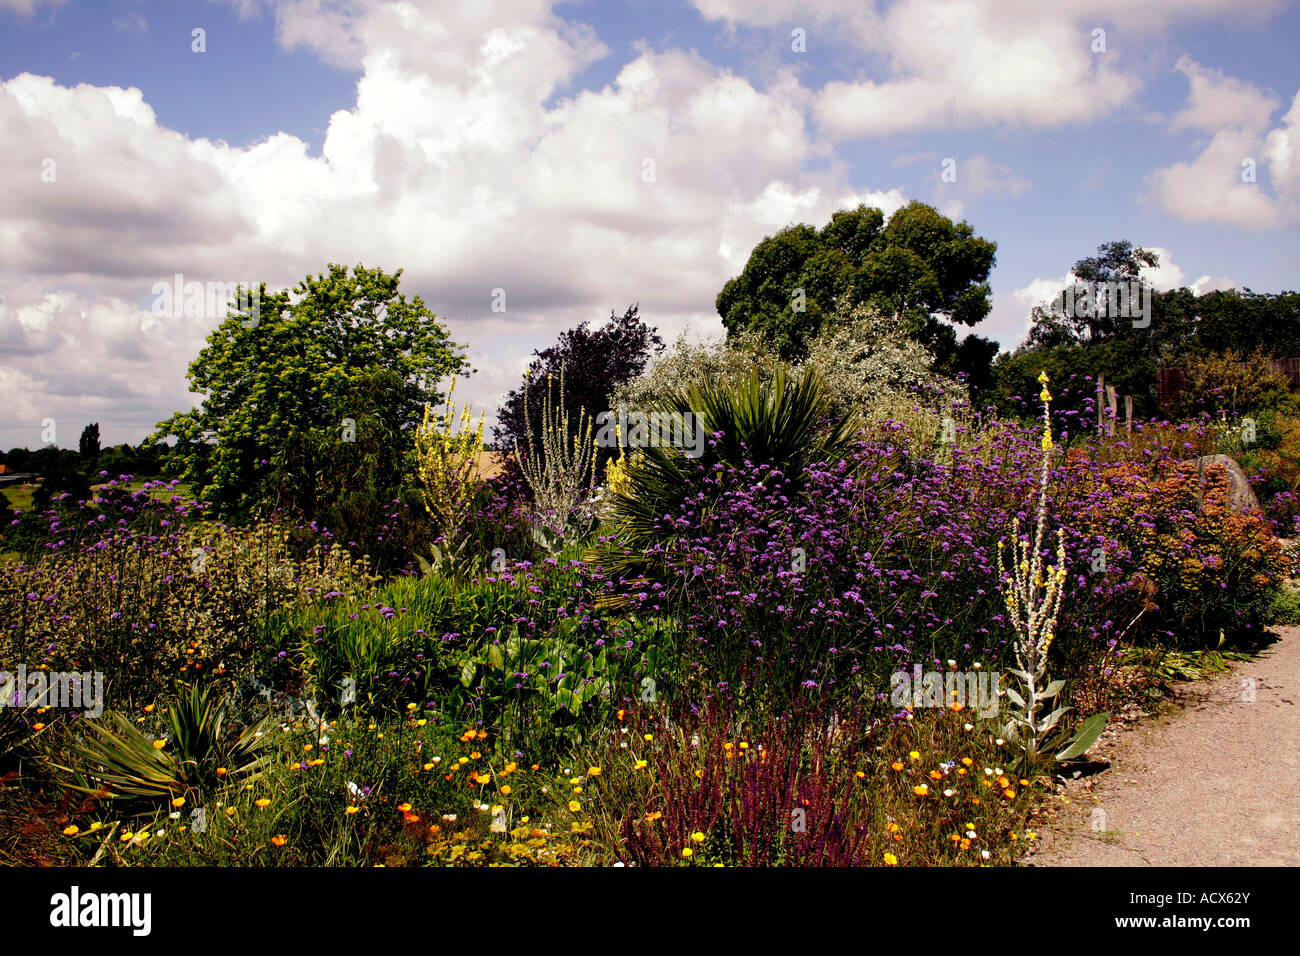 HORTICULTURE. DRY GARDEN. RHS HYDE HALL ESSEX Stock Photo